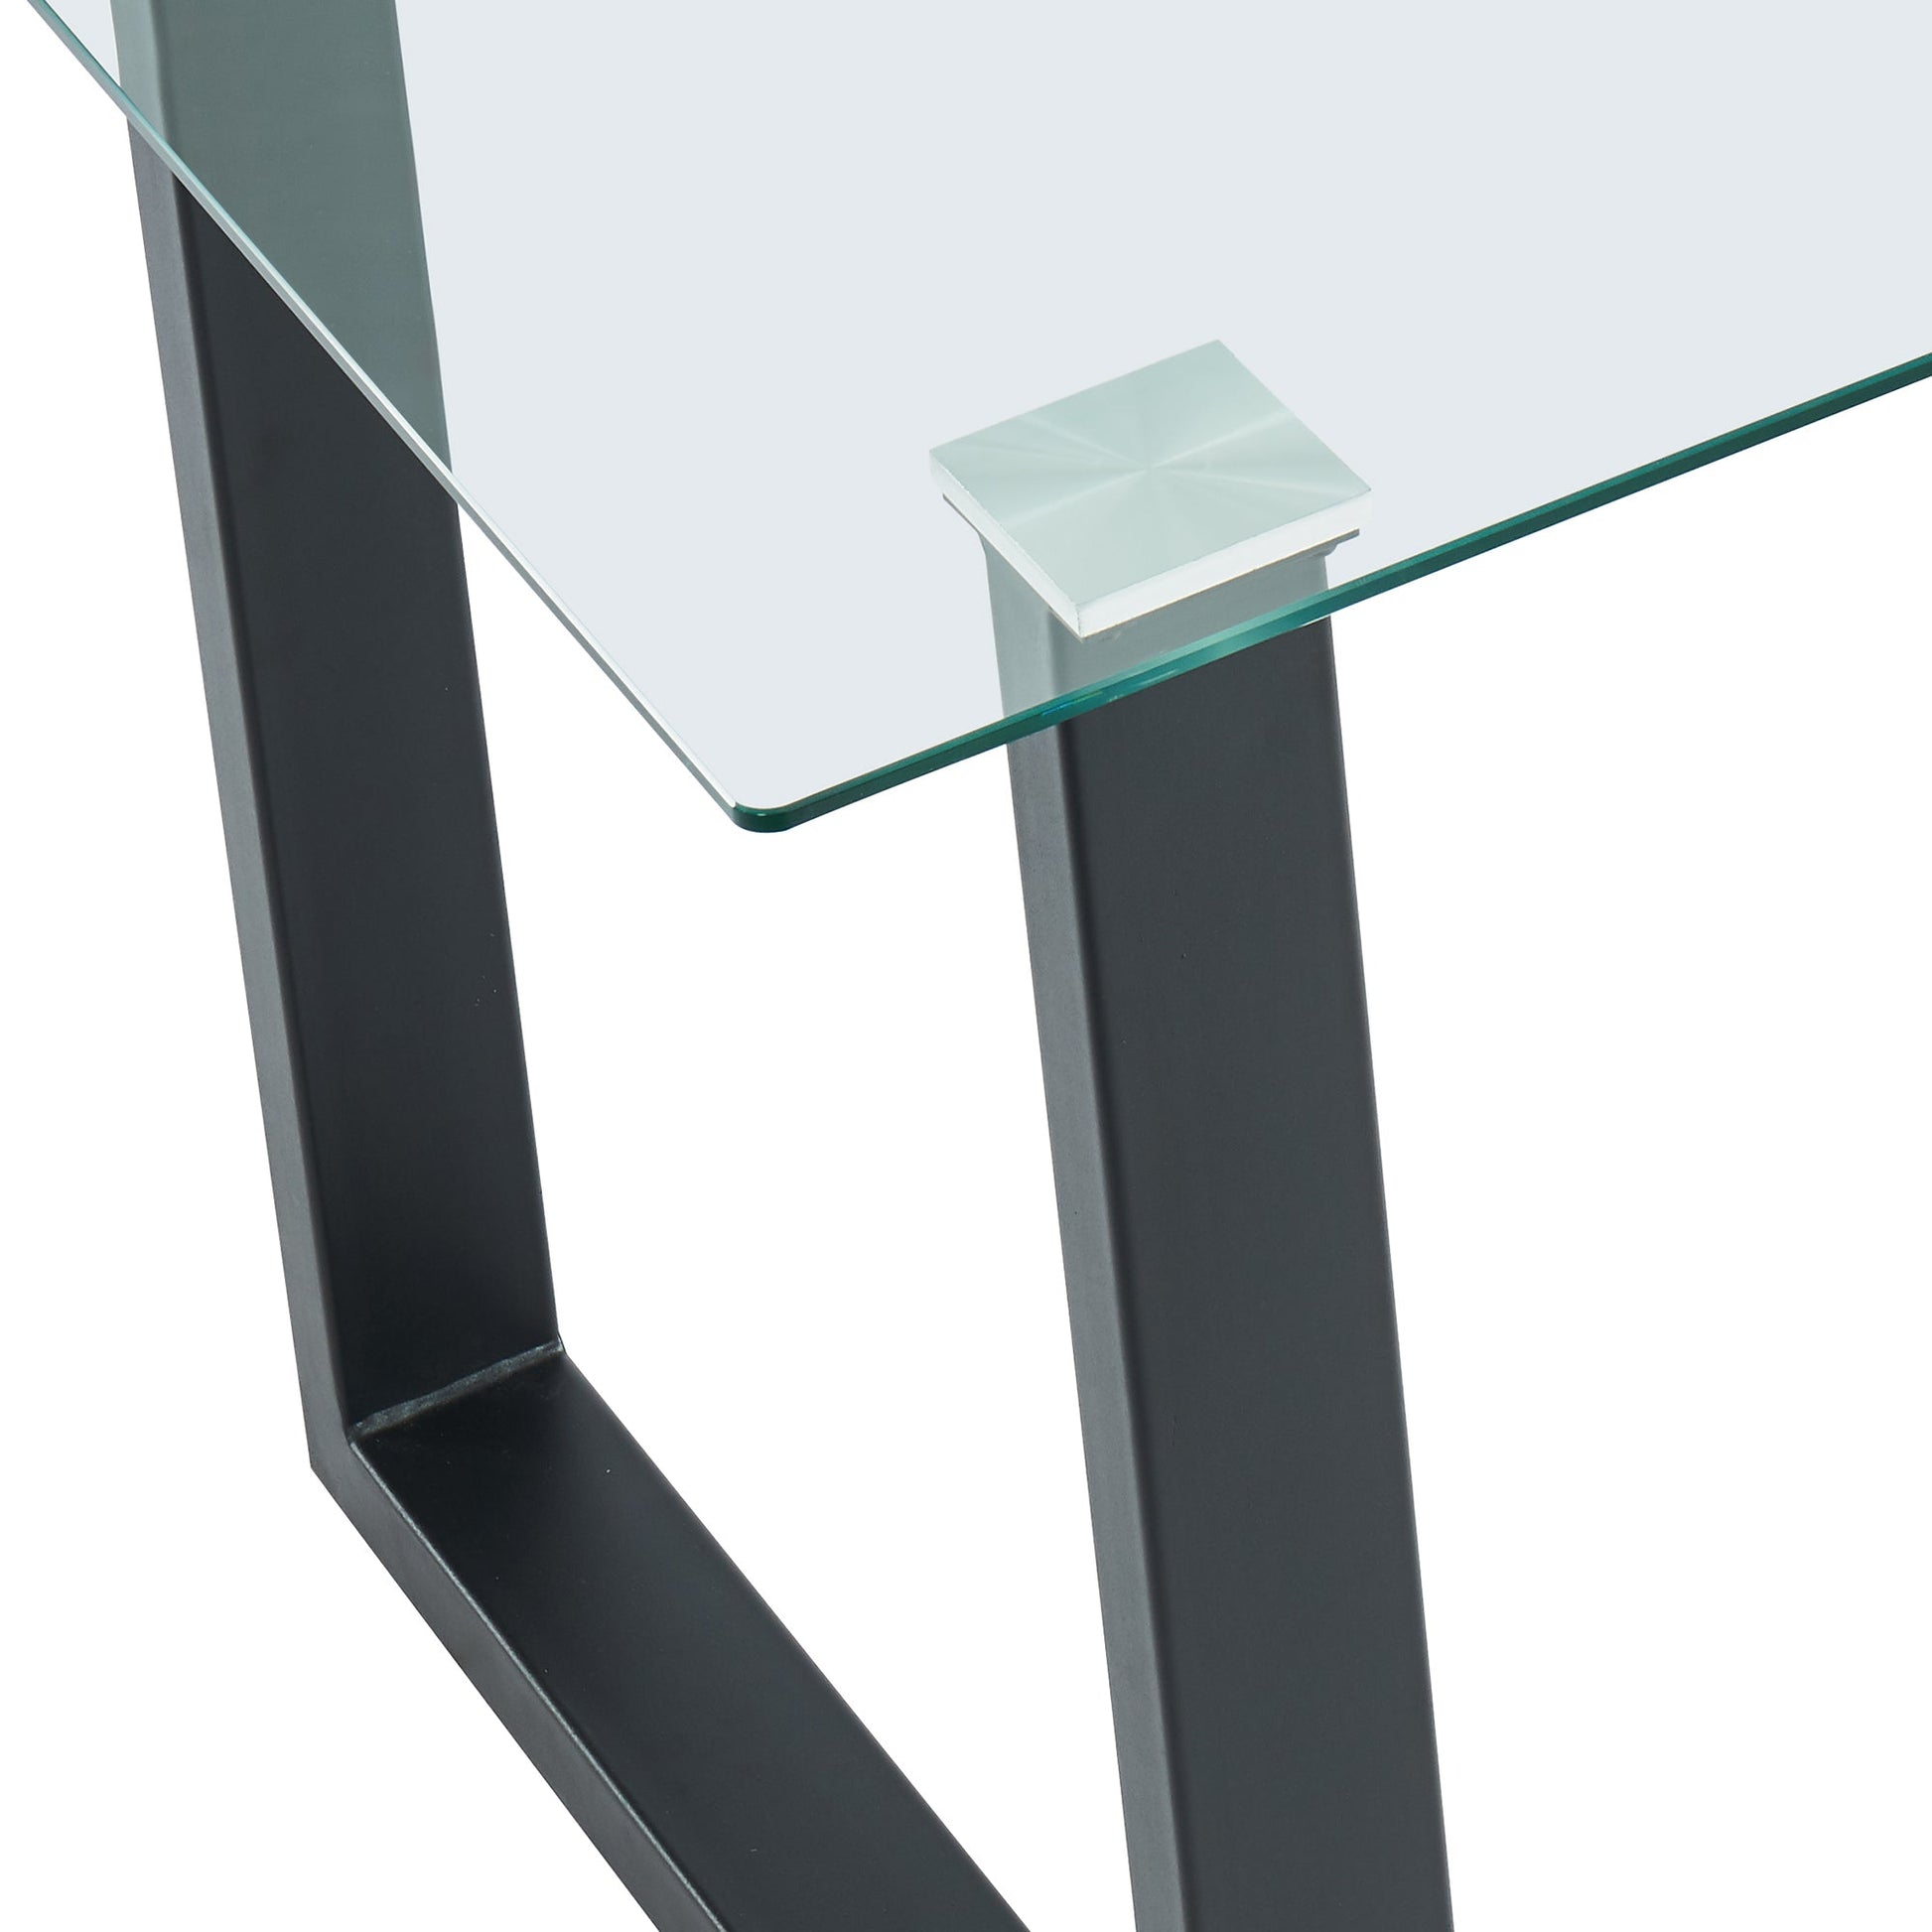 Square Glass Dining Table Franco Black - Your Bar Stools Canada